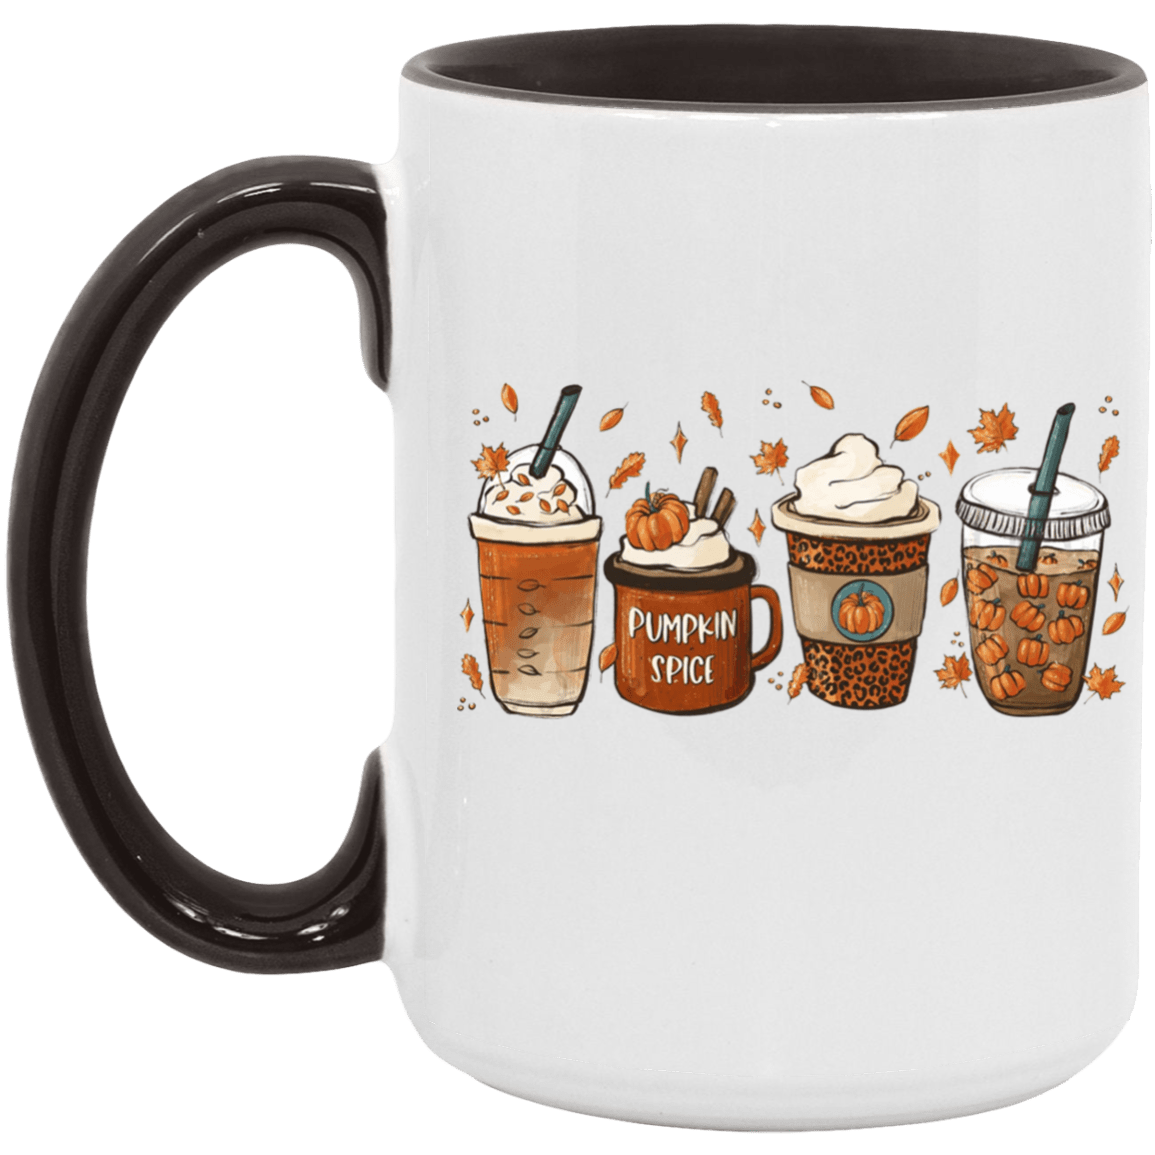 Pumpkin Spice and Latte Coffee Cup